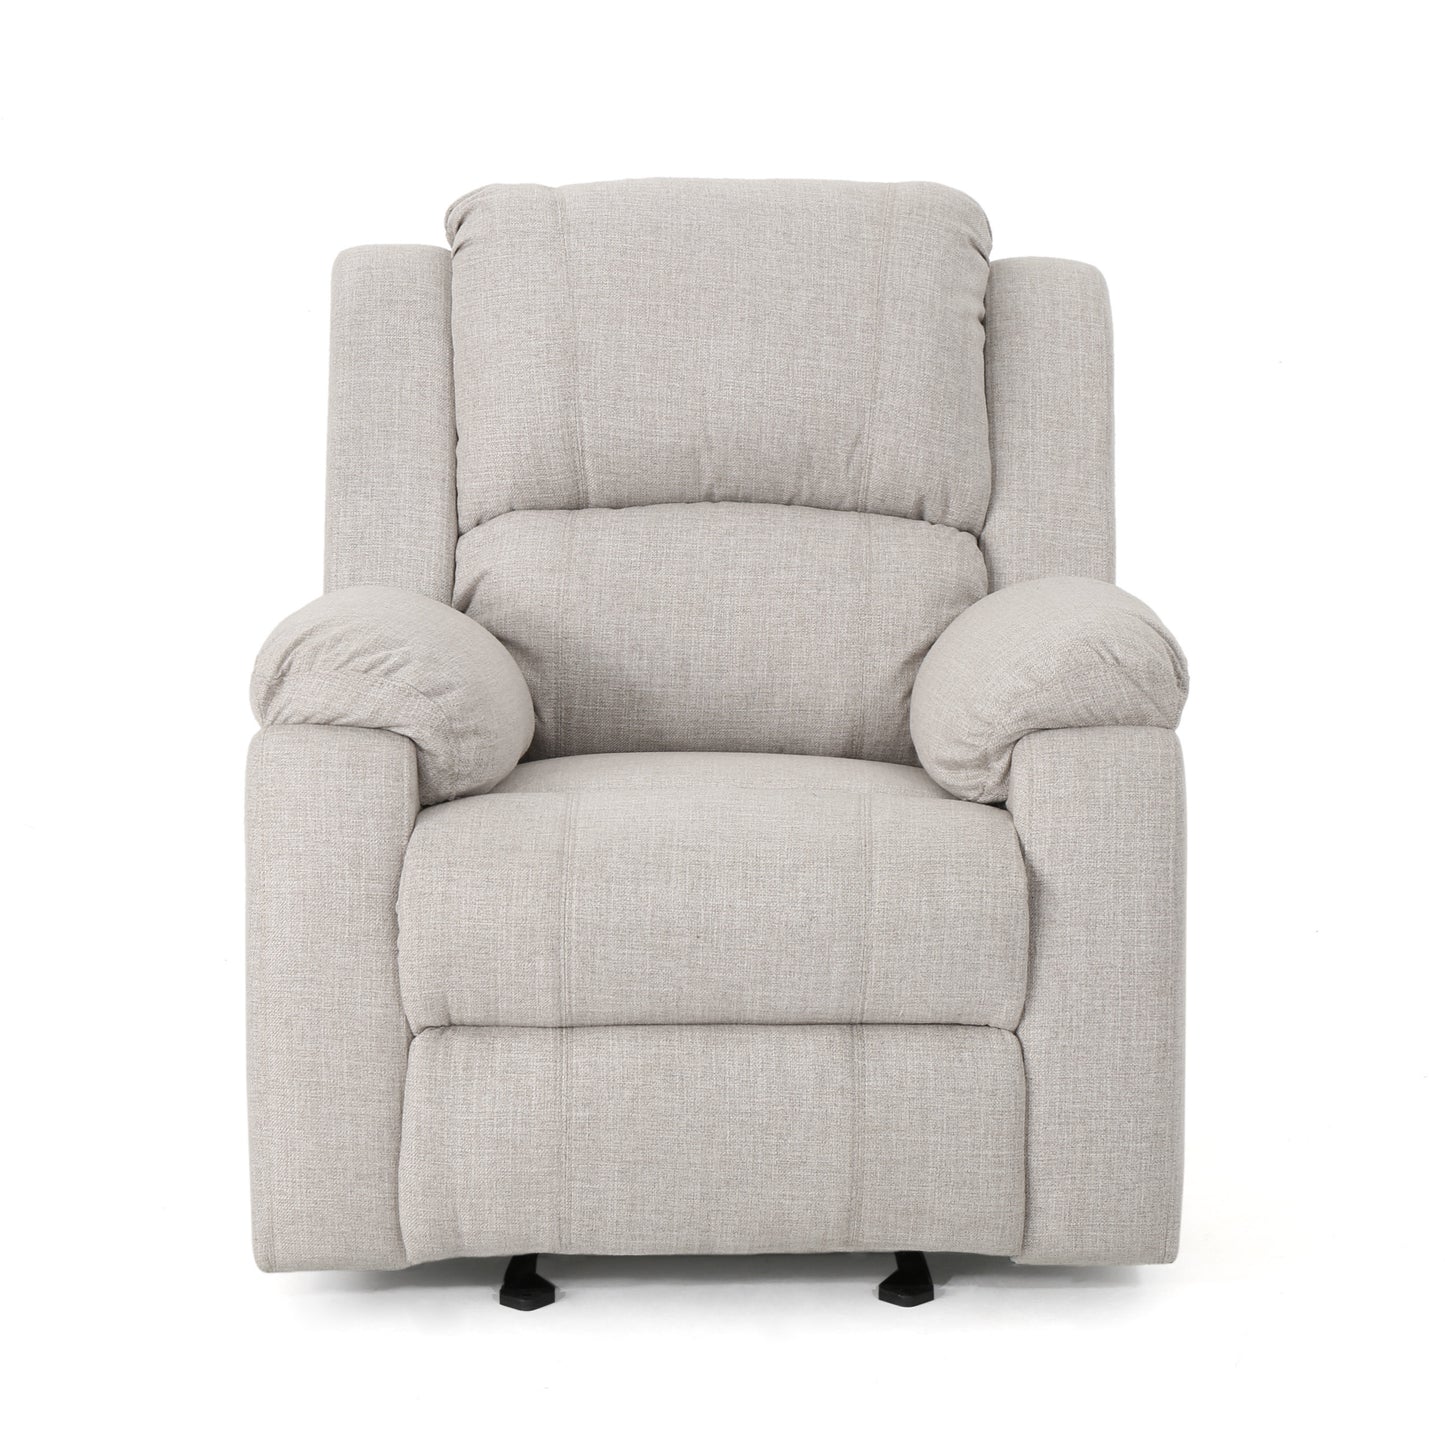 Scarlett Contemporary Pillow Top Fabric Upholstered Gliding Recliner Chair